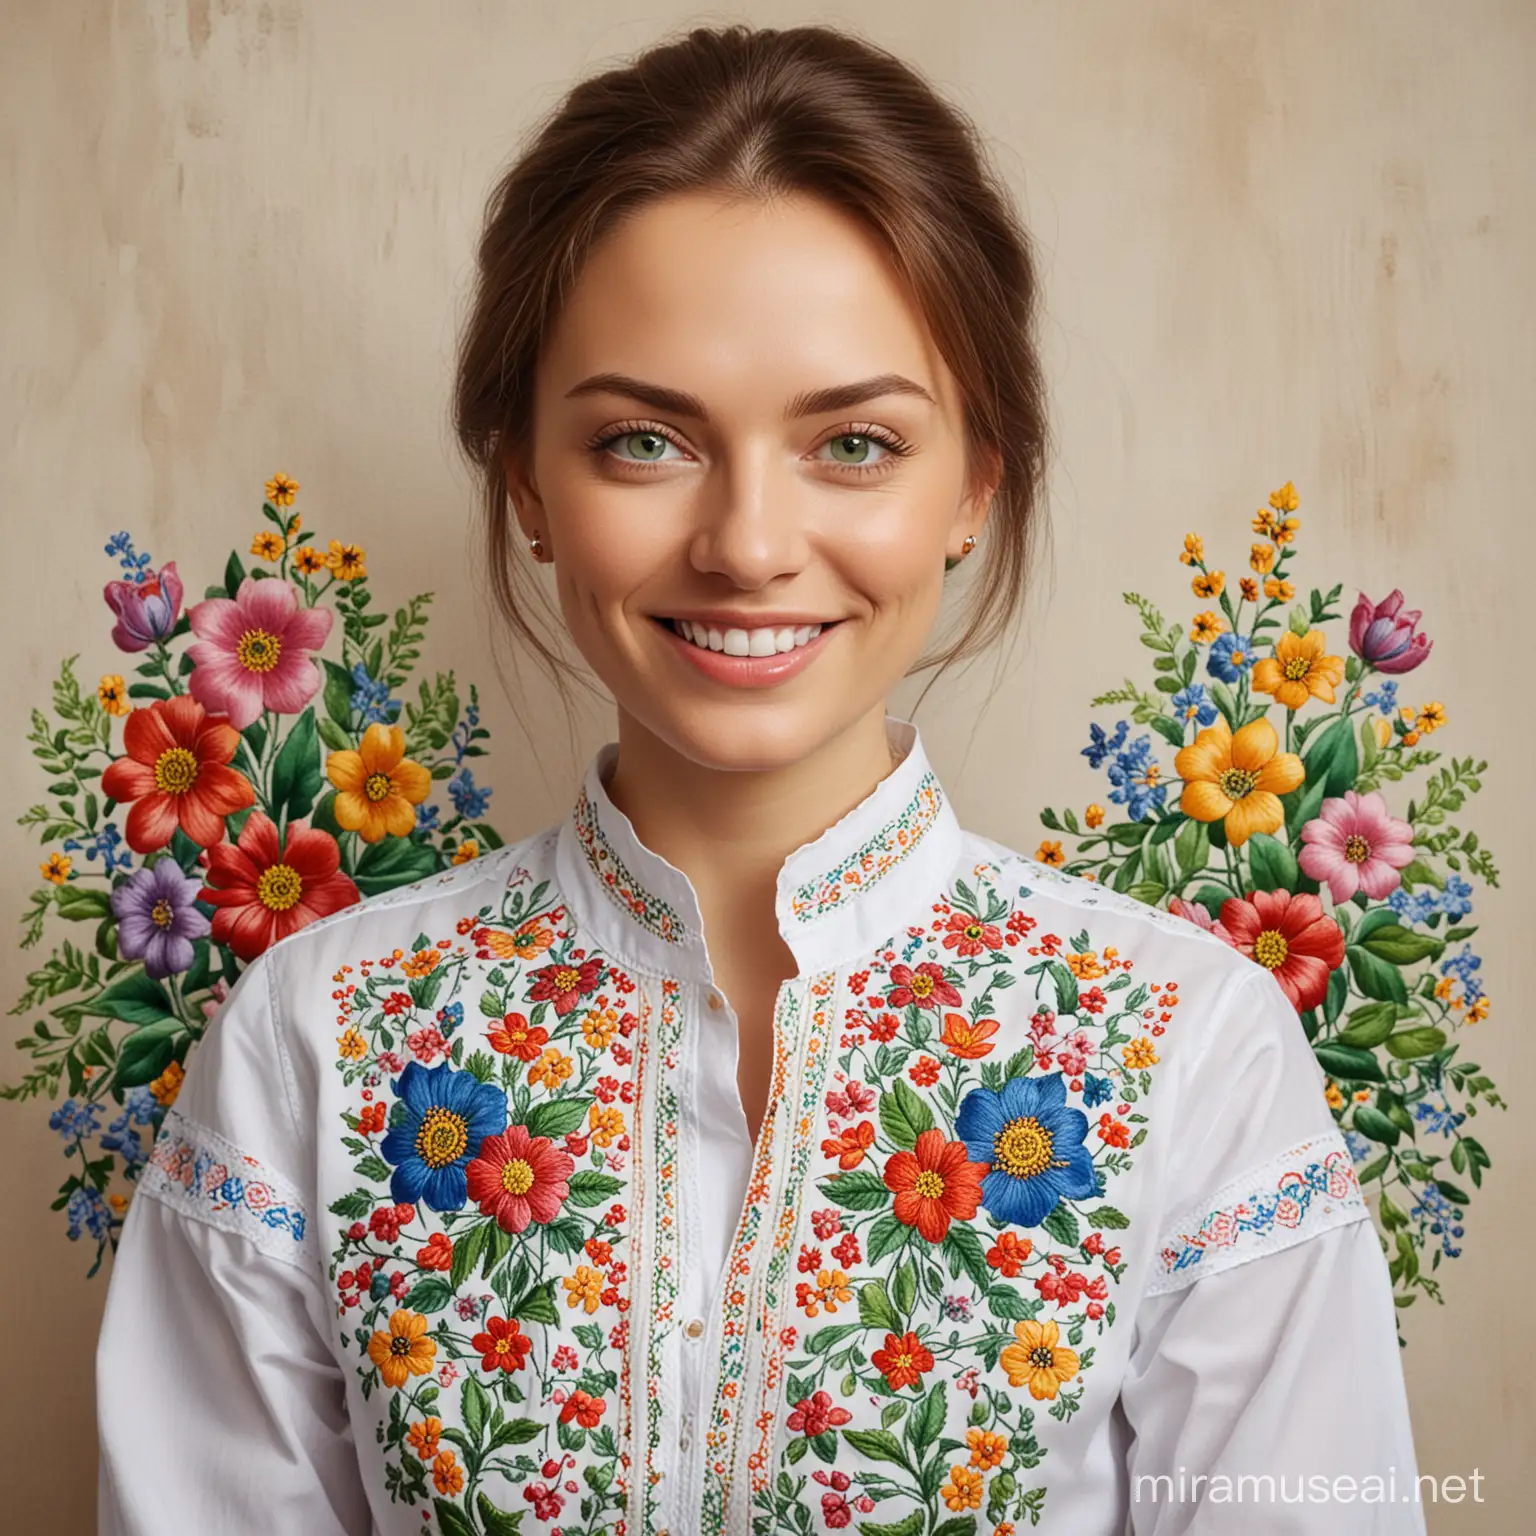 Adult Woman Smiling in Art Studio Surrounded by Ukrainian Embroidered Paintings and Flowers